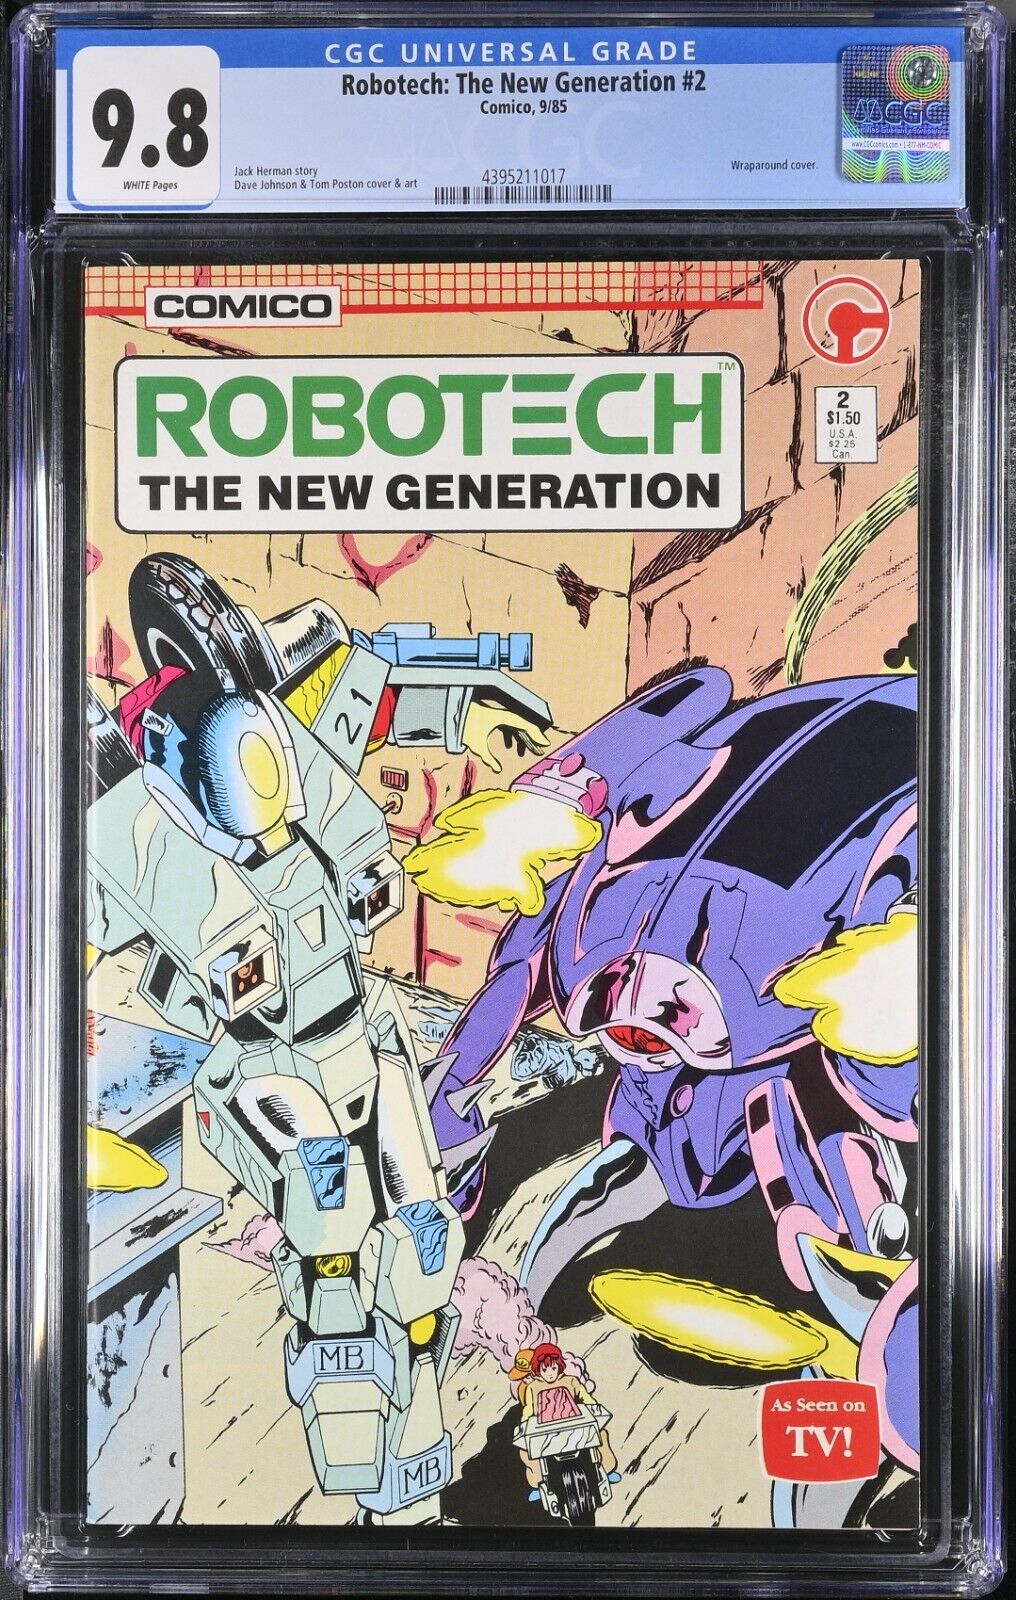 ROBOTECH: THE NEW GENERATION #2 - CGC 9.8 - WP - NM/MT - WRAPAROUND COVER